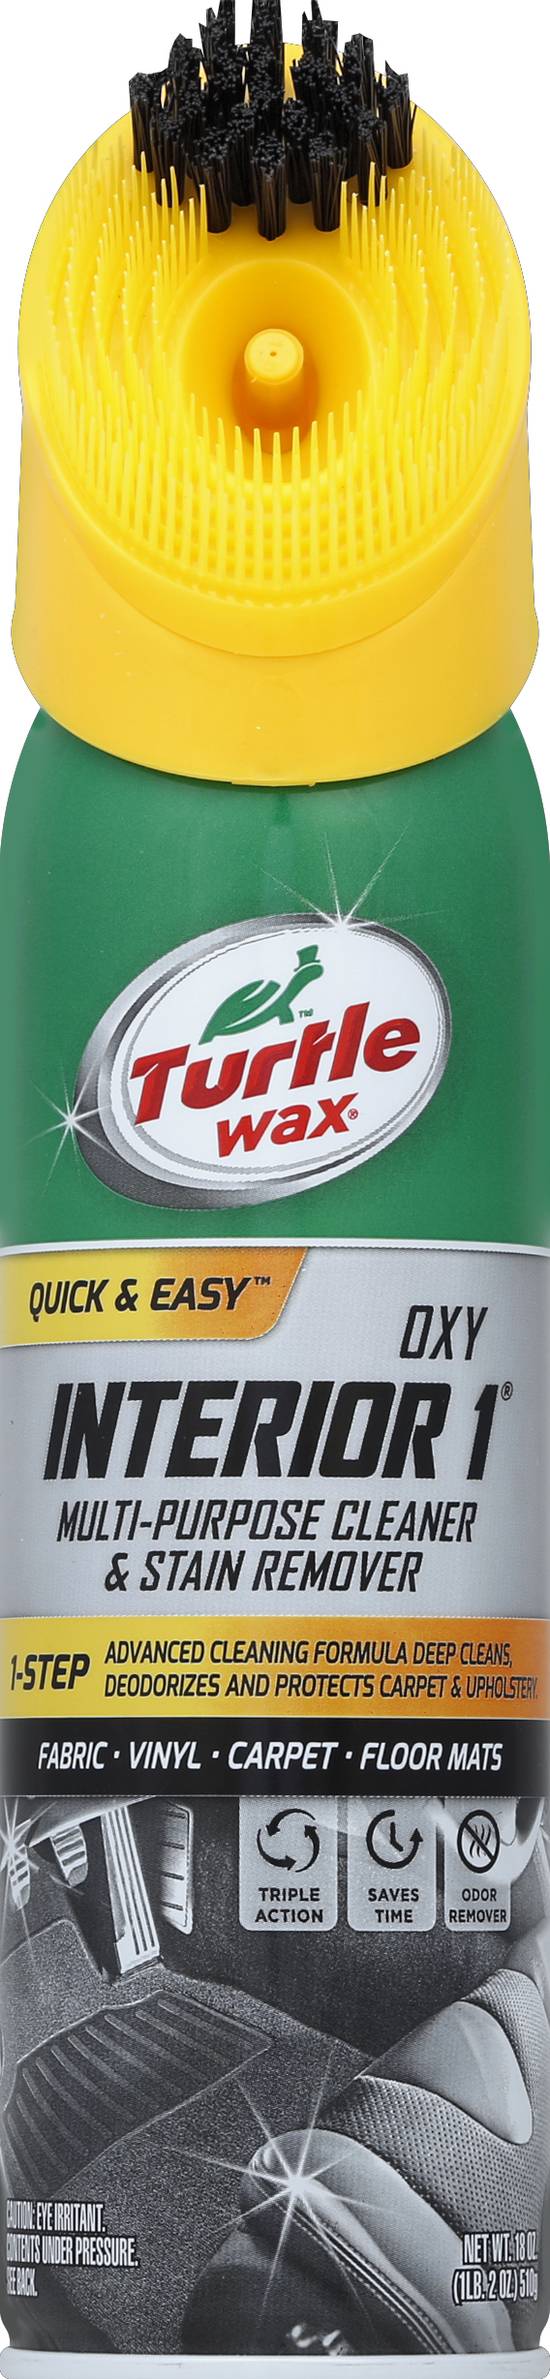 Turtle Wax Quick & Easy Oxy Interior 1 Cleaner & Stain Remover